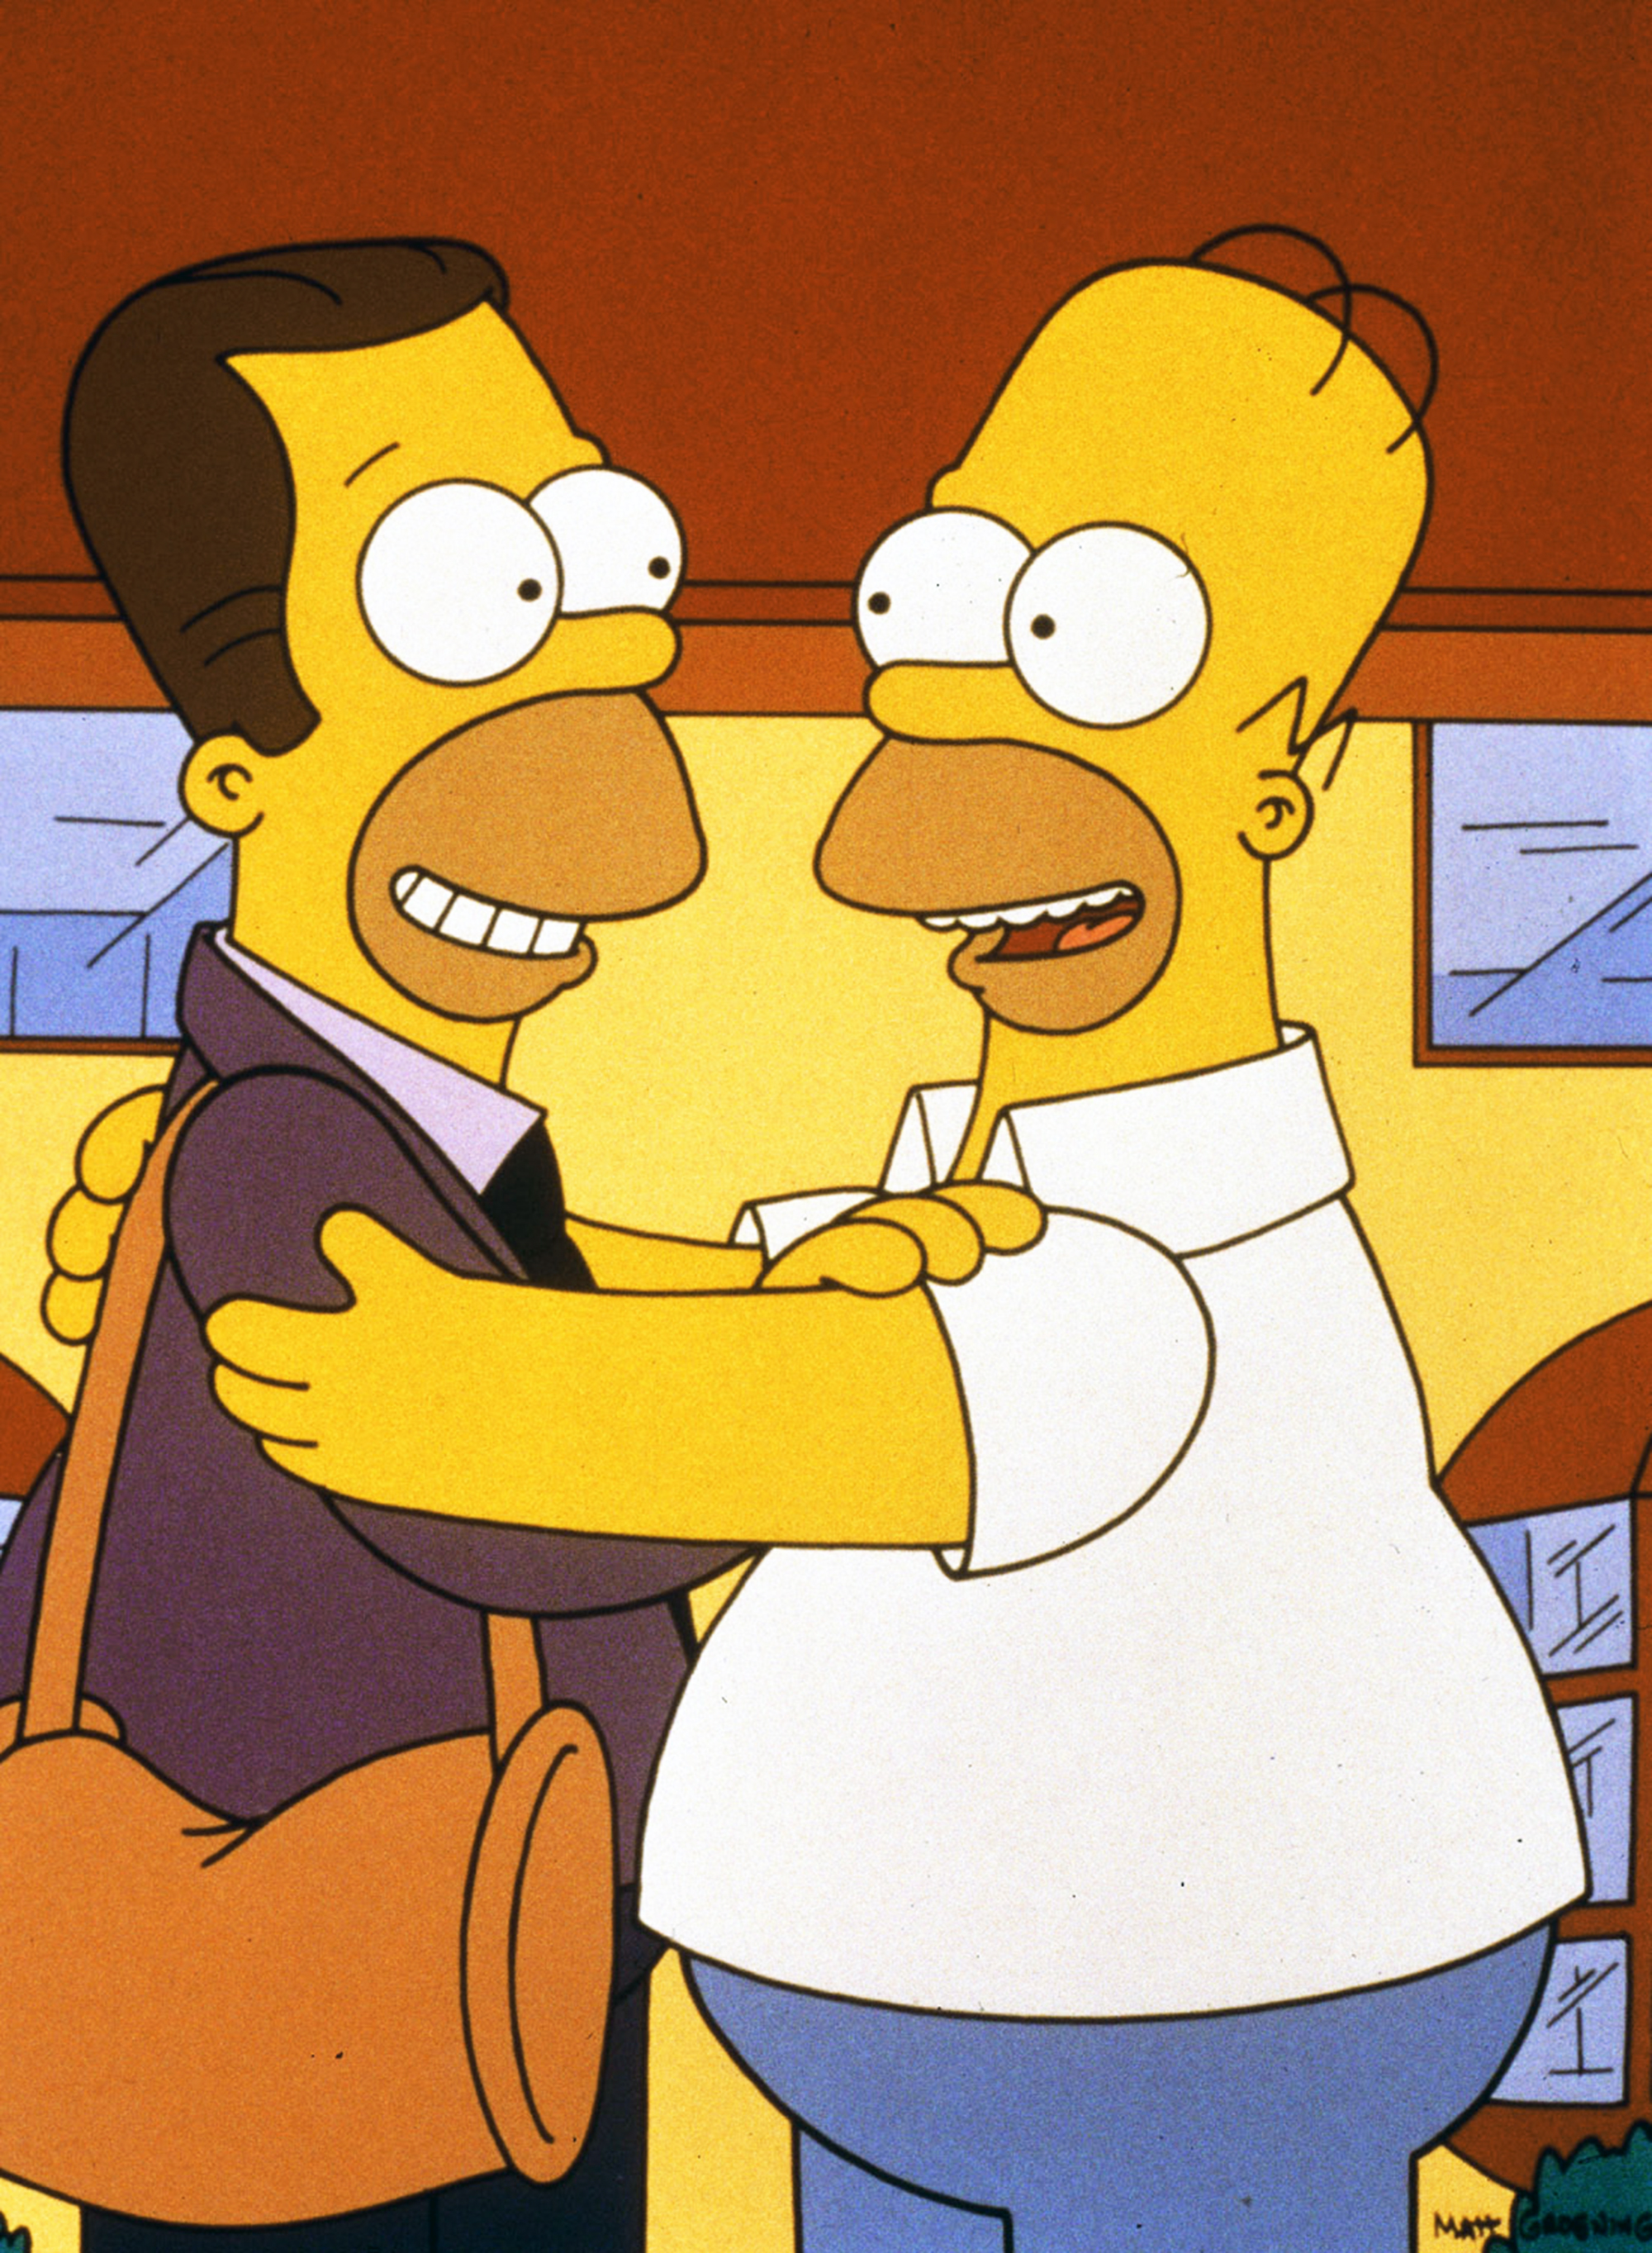 Danny DeVito: DeVito appeared three times on The Simpsons as Homer's half-brother, Herb Powell, first in "Oh Brother Where Art Thou?" in 1991 and then in 1992's "Brother, Can you Spare Two Dimes?" more than 20 years later, in 2013, in "The Changing of the Guardian."